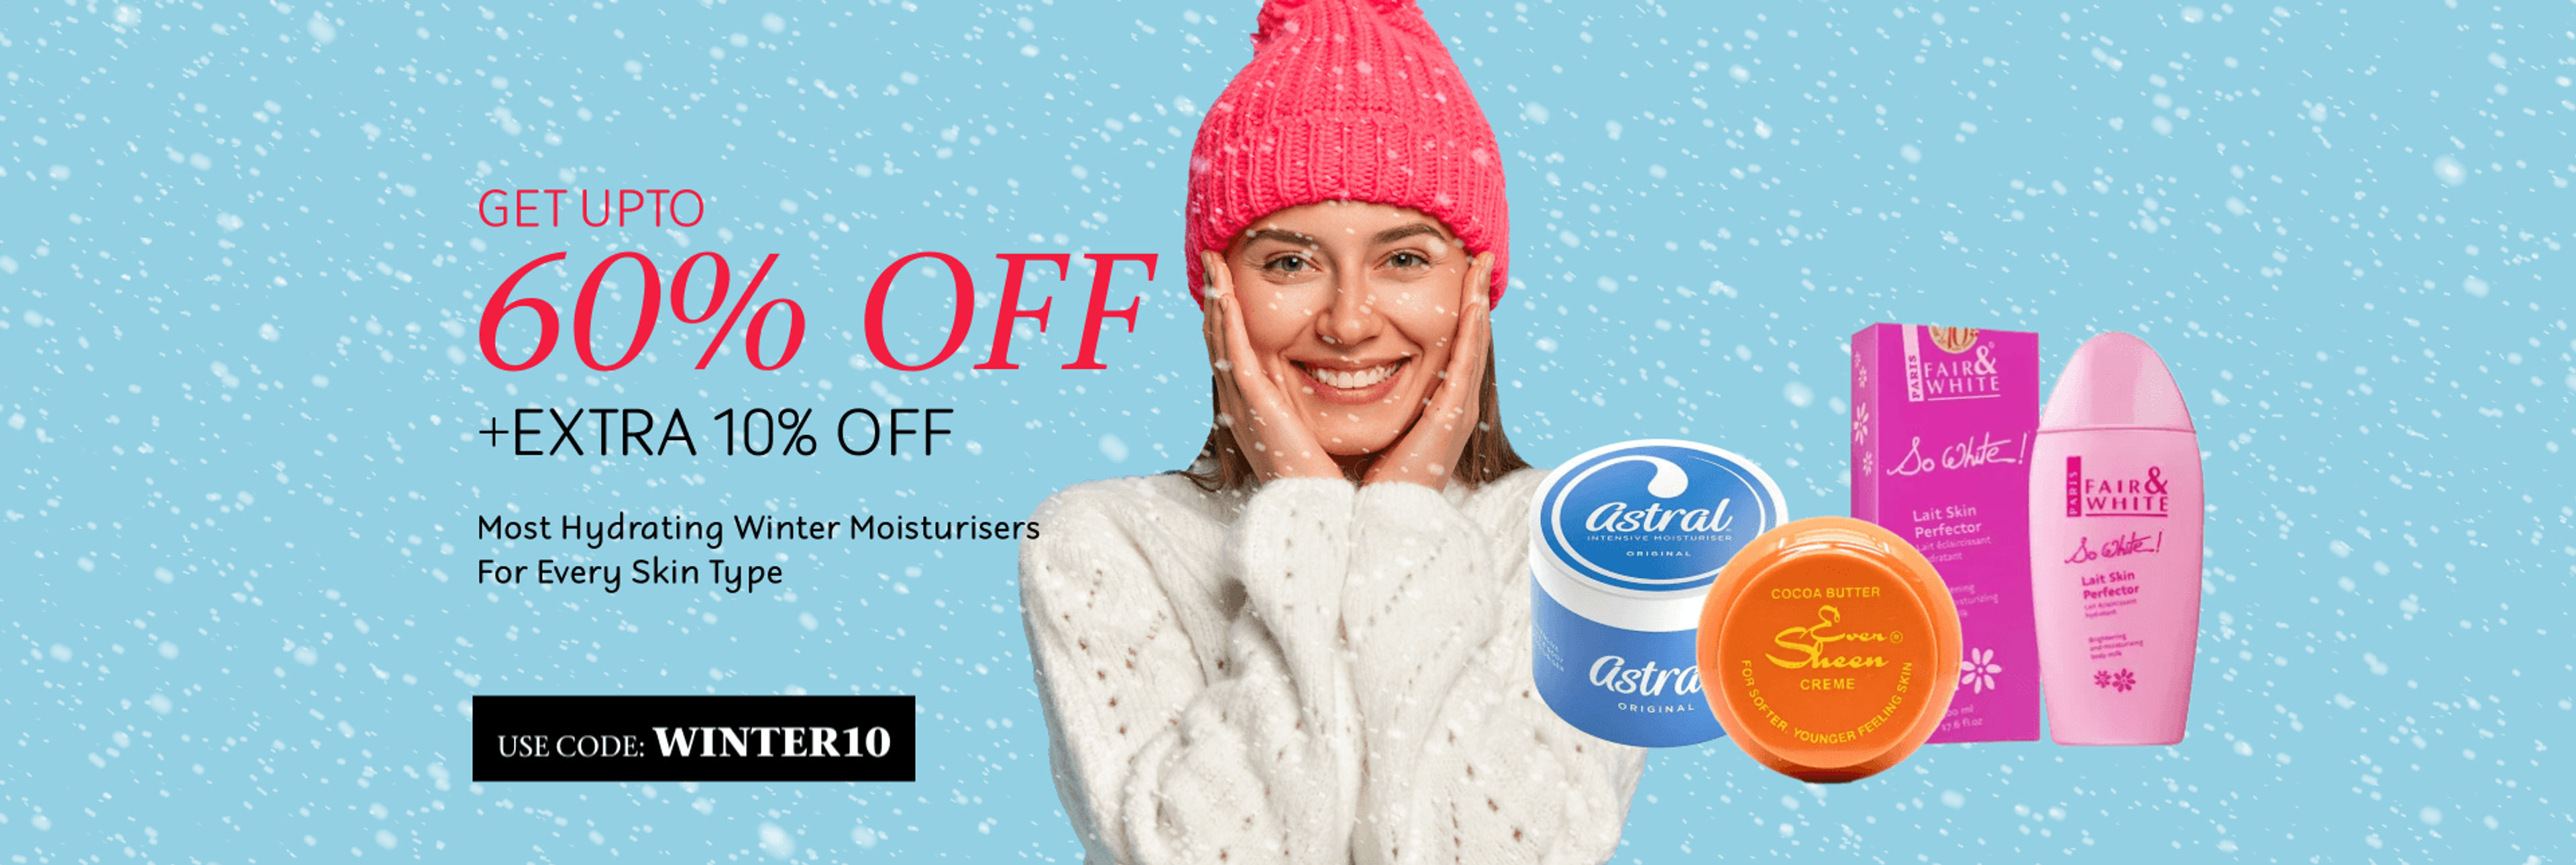 Get up to 60% off on Most Hydrating Winter Moisturisers For Every Skin Type + extra 10% off by using code